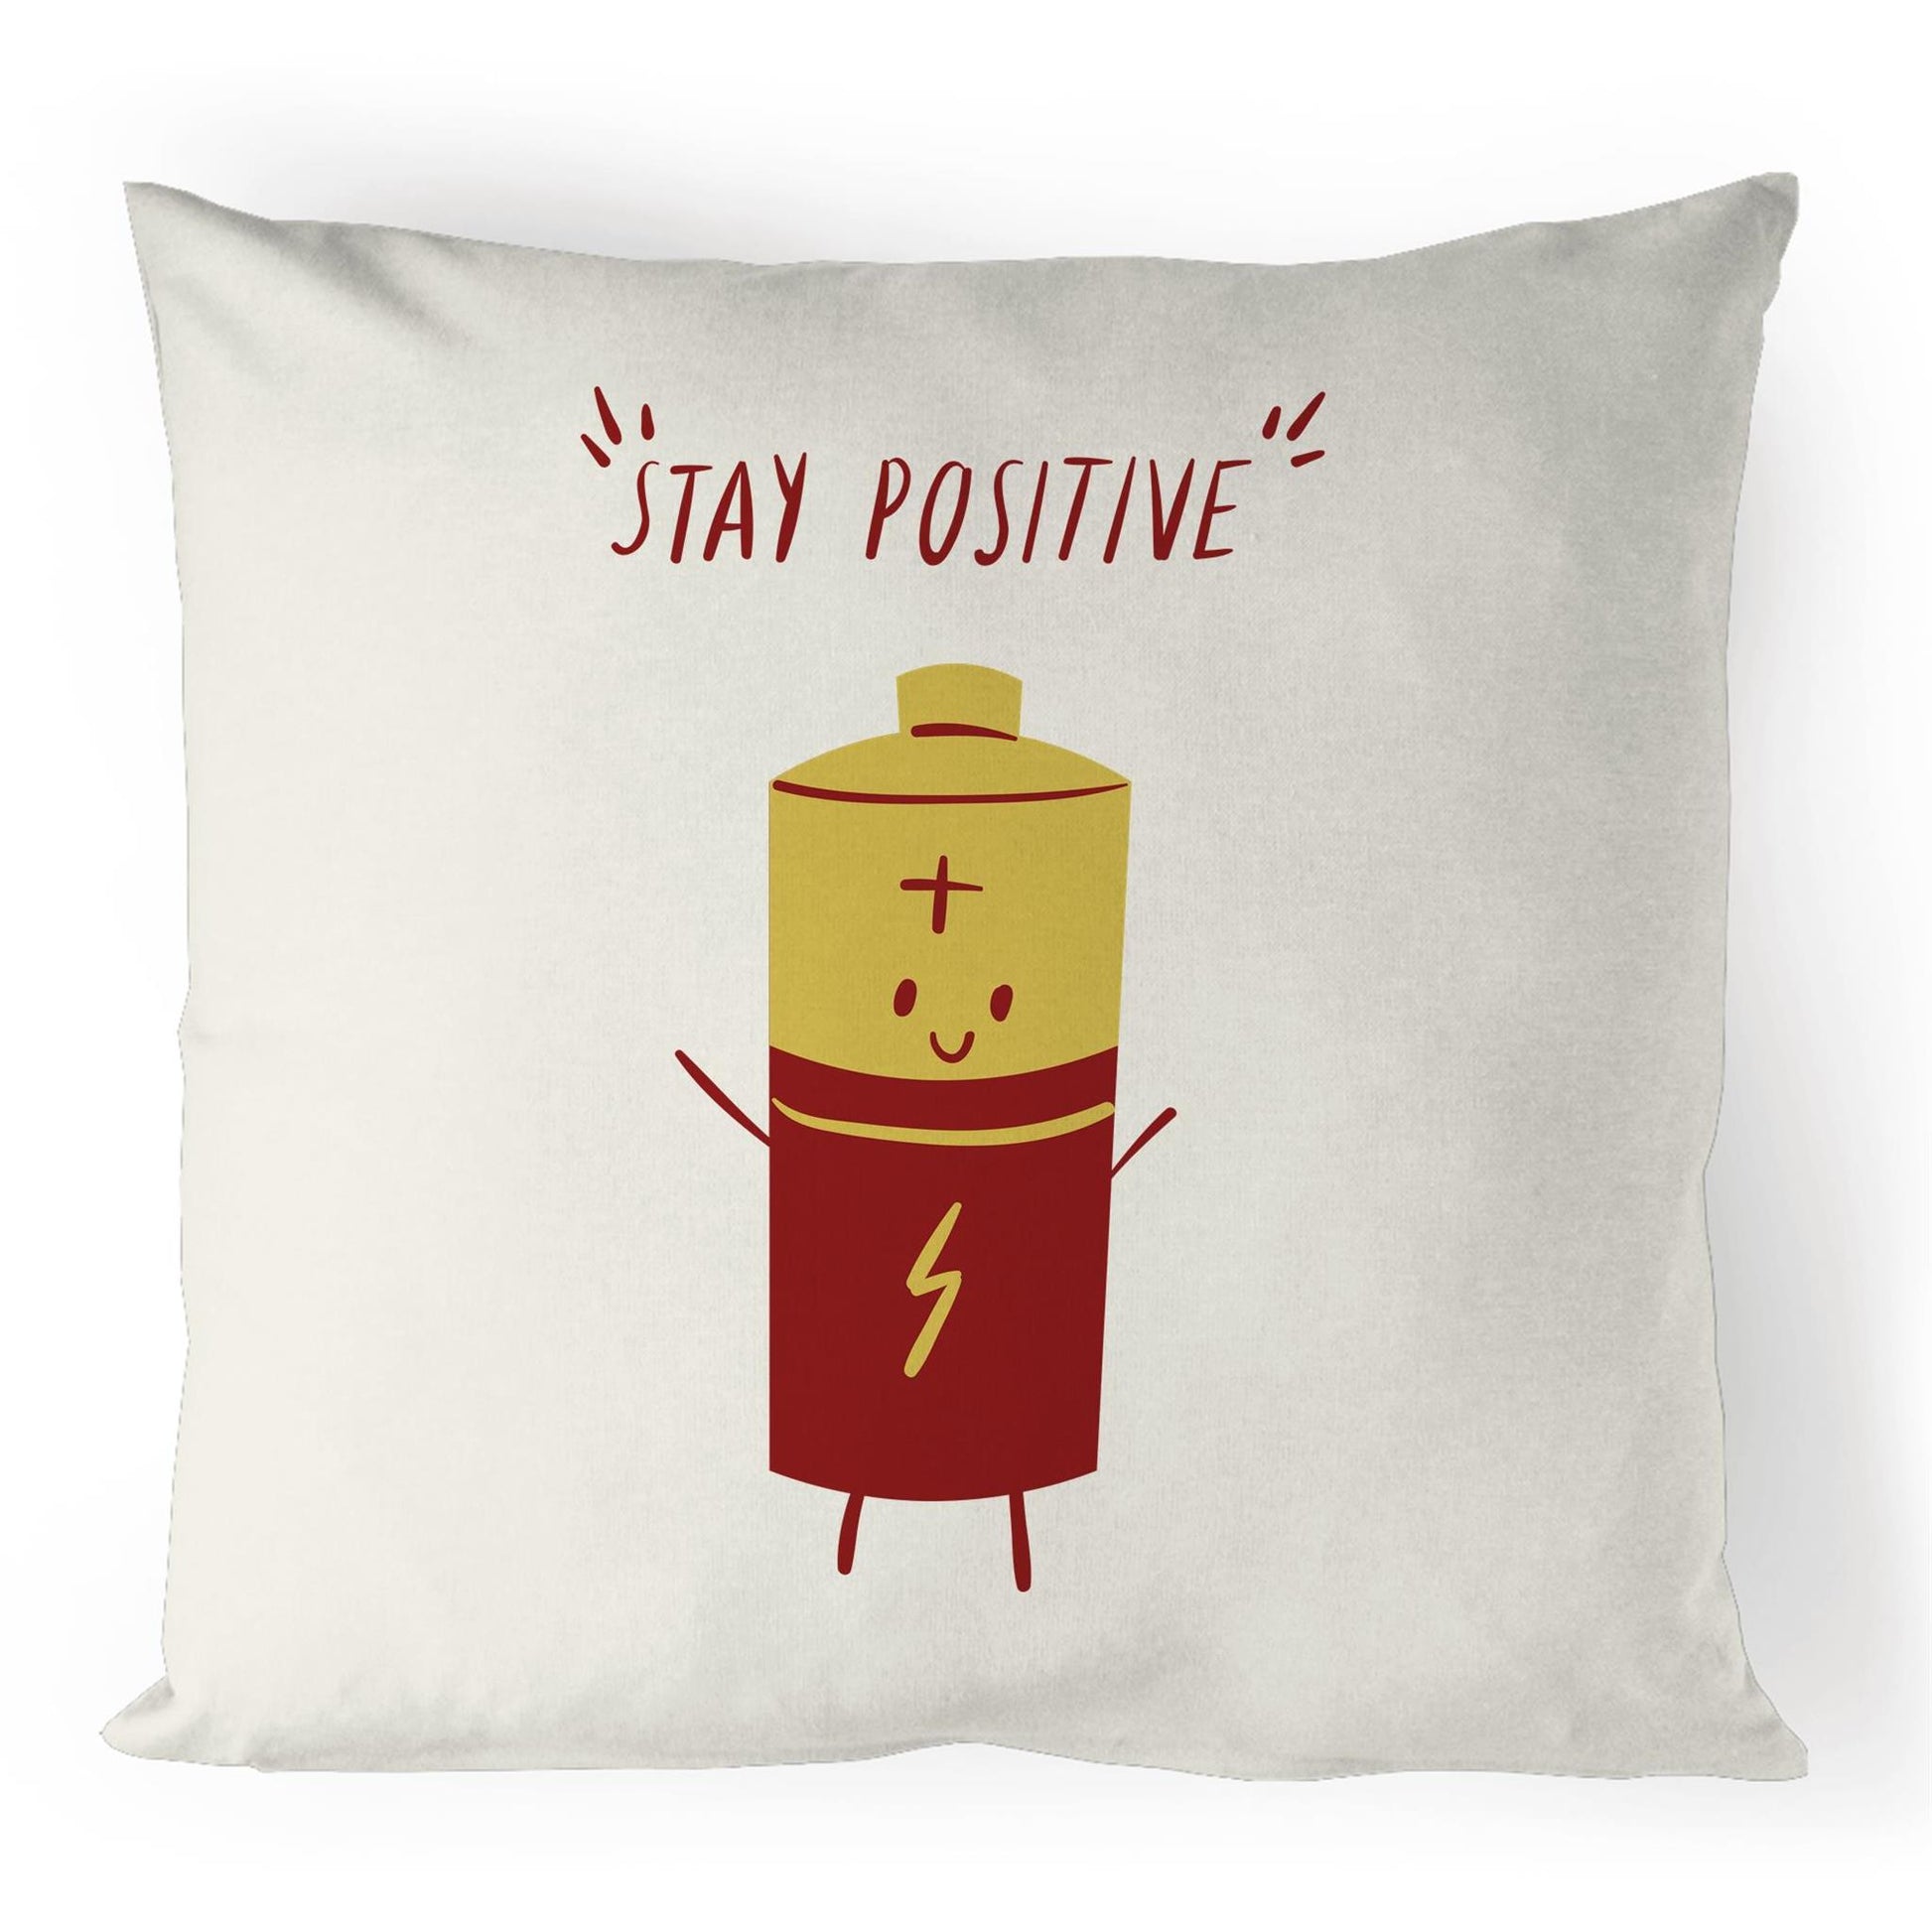 Stay Positive - 100% Linen Cushion Cover Natural One-Size Linen Cushion Cover Funny